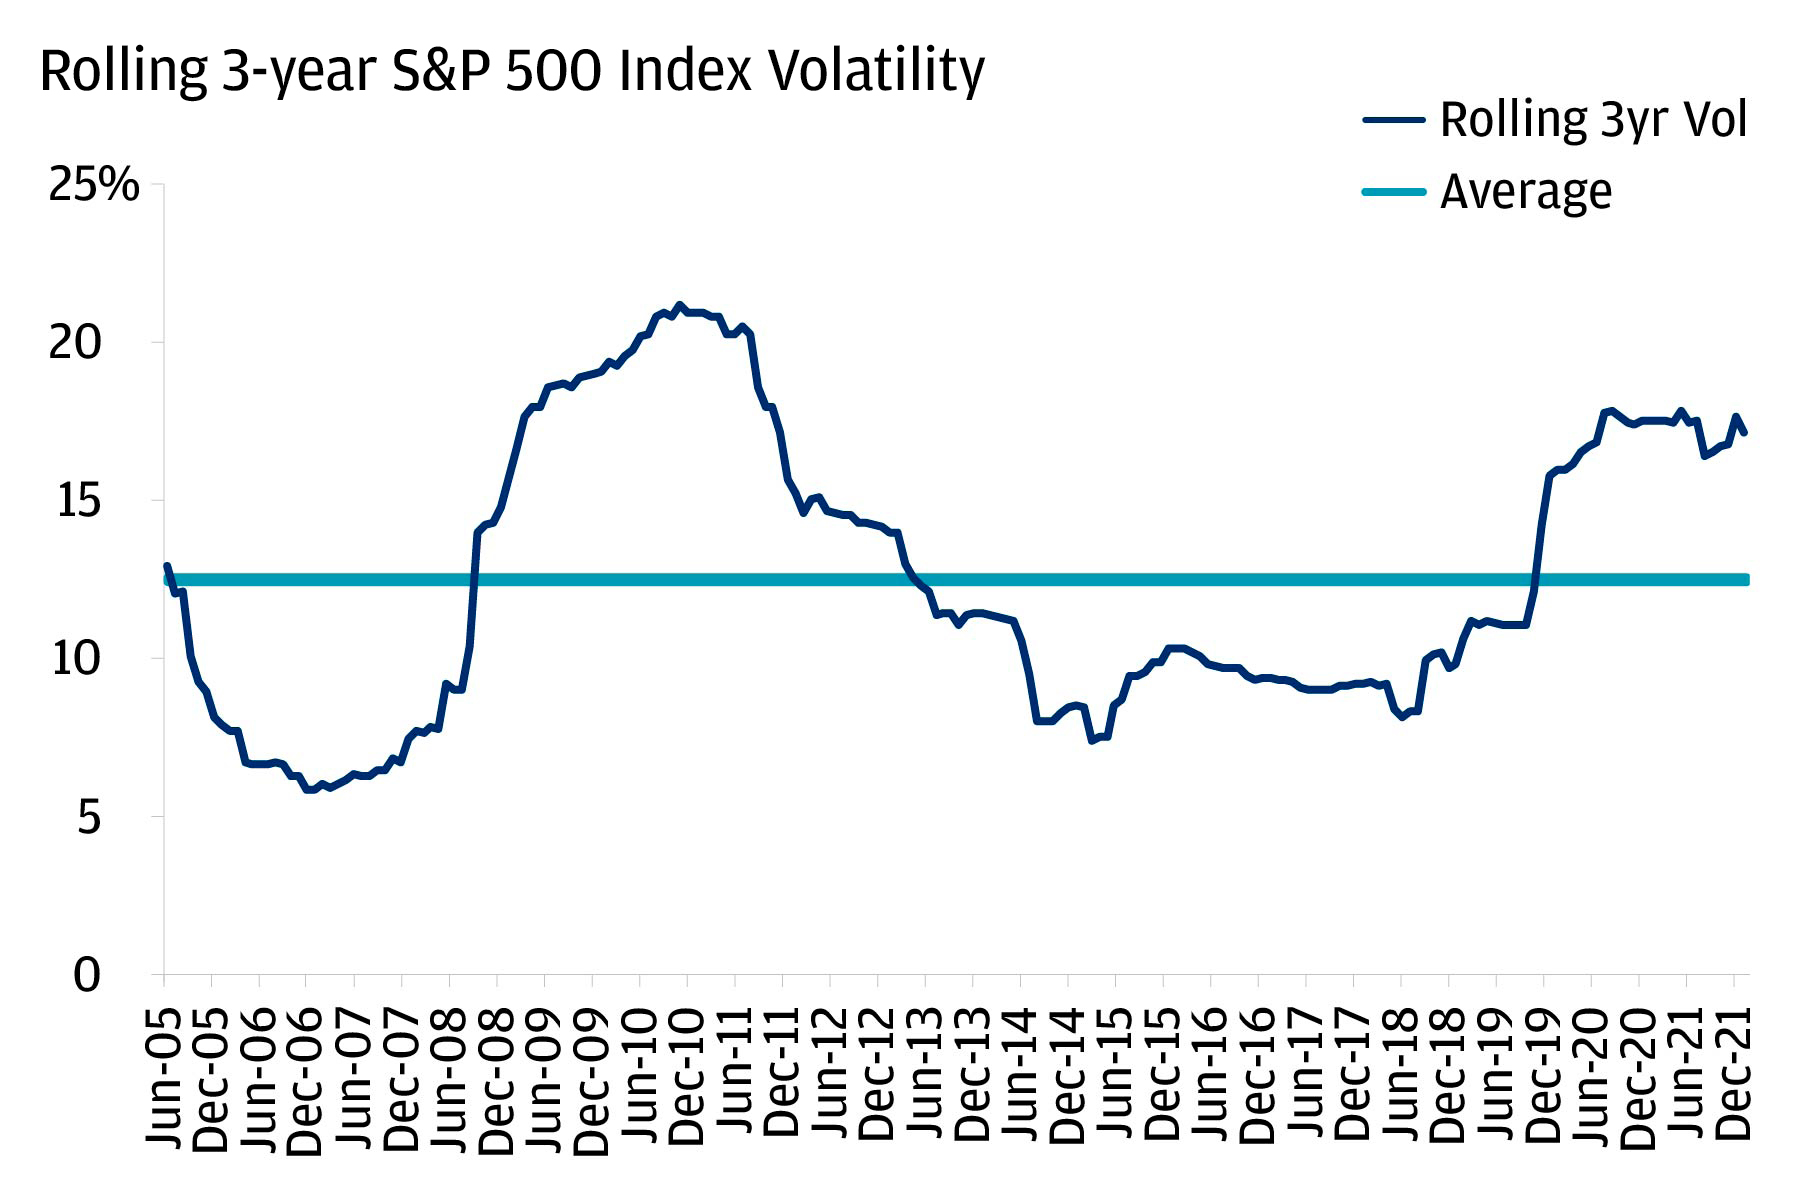 Line chart of rolling three-year S&P 500 Index volatility since 2005, along with the average during that time period ‚Äì showing that volatility has spiked in the recent past.